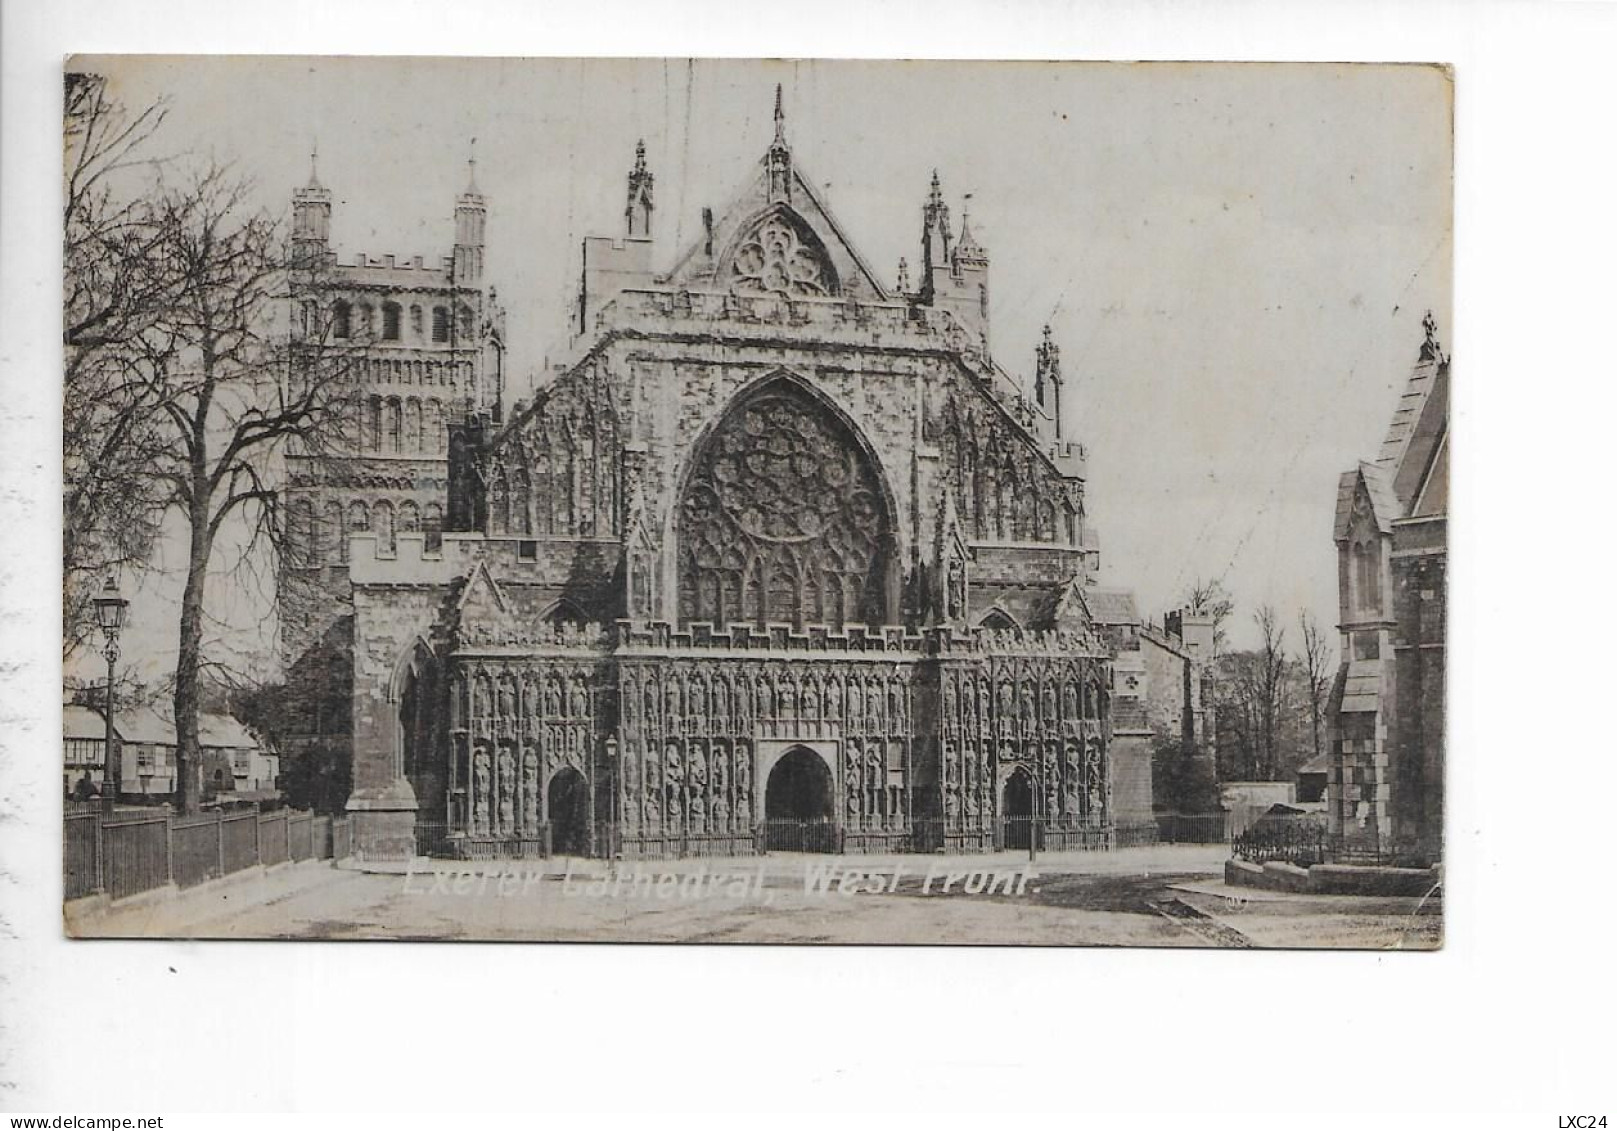 EXETER CATHEDRAL. WEST FRONT. - Exeter